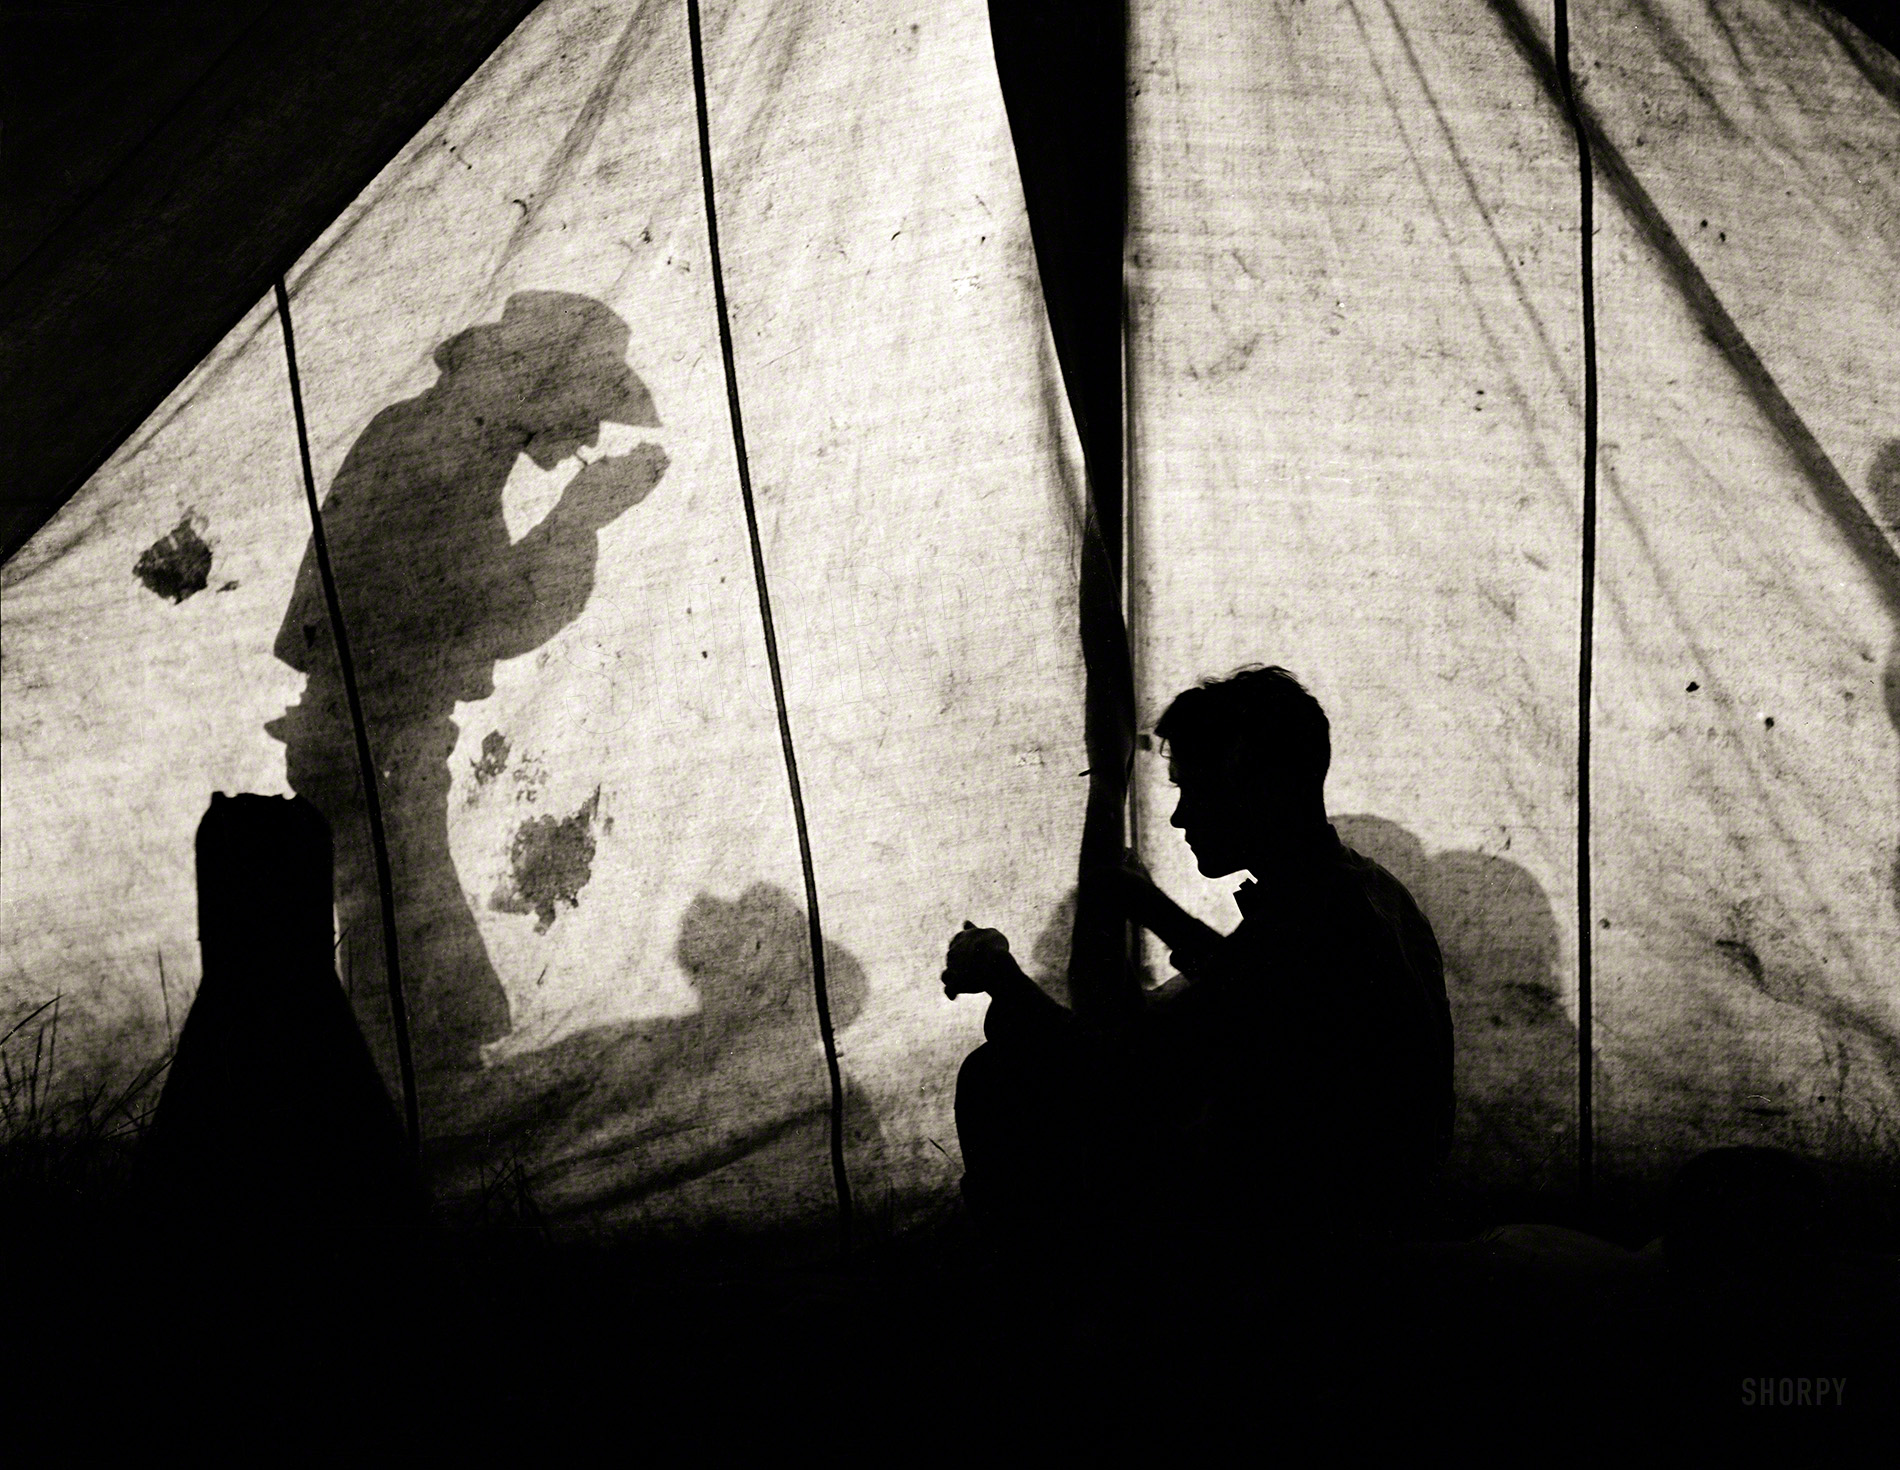 June 1939. "Shadows on tent, Quarter Circle U Ranch, Big Horn County, Mont." Photo by Arthur Rothstein for the Farm Security Administration. View full size.